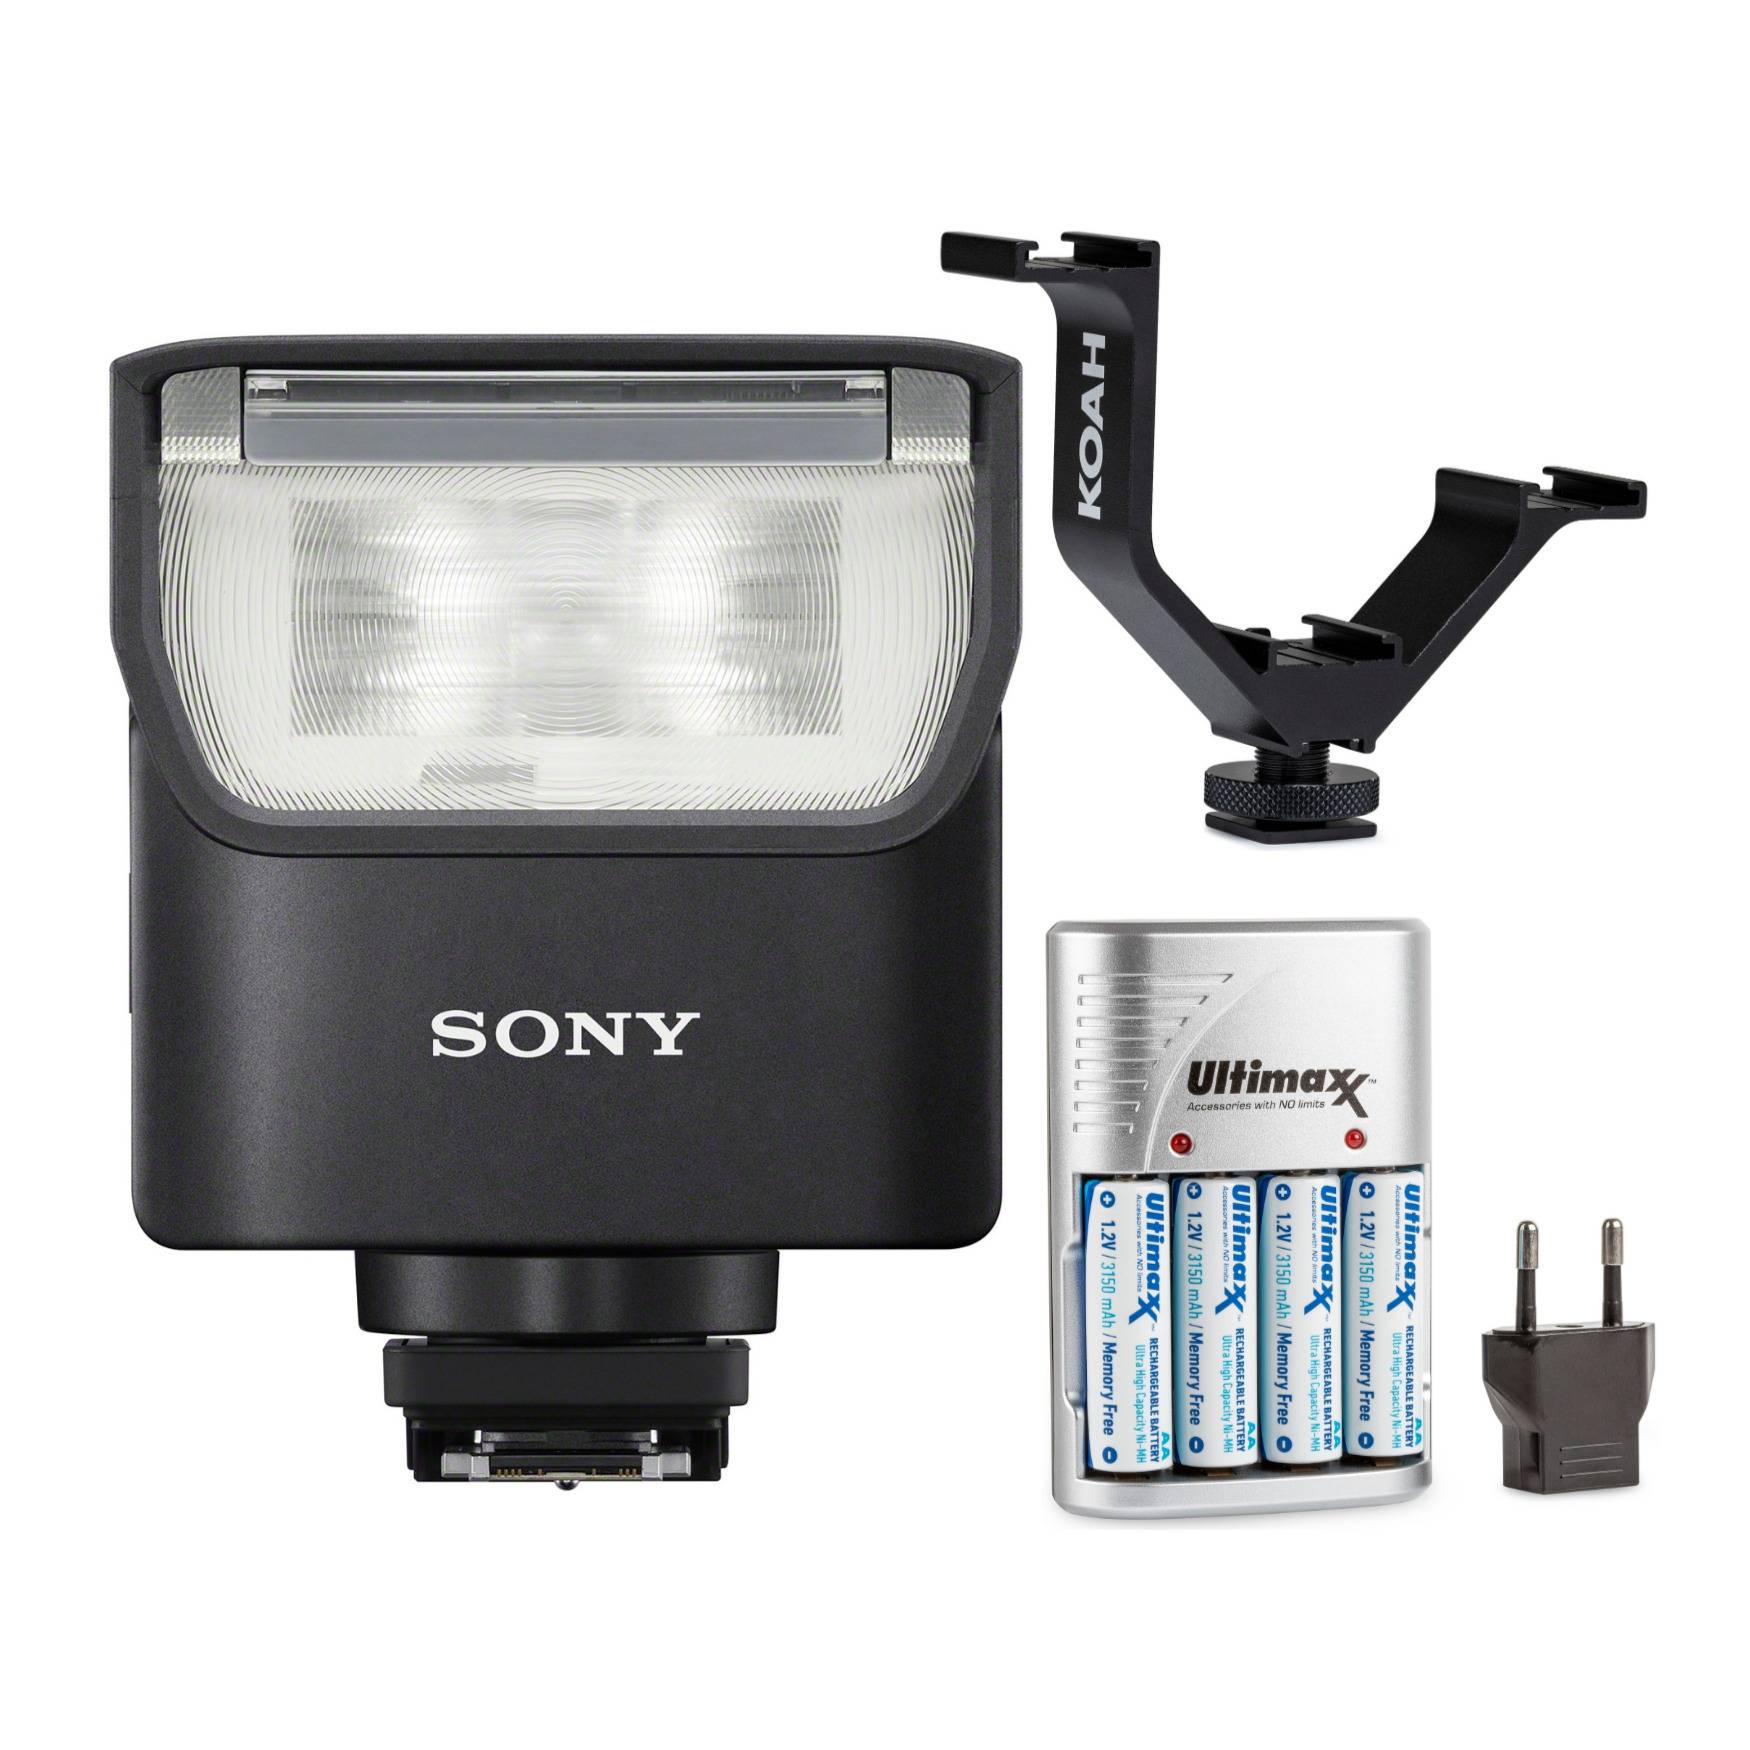 Sony Alpha HVL-F28RM External Flash with Wireless Remote Control and Accessory Bundle